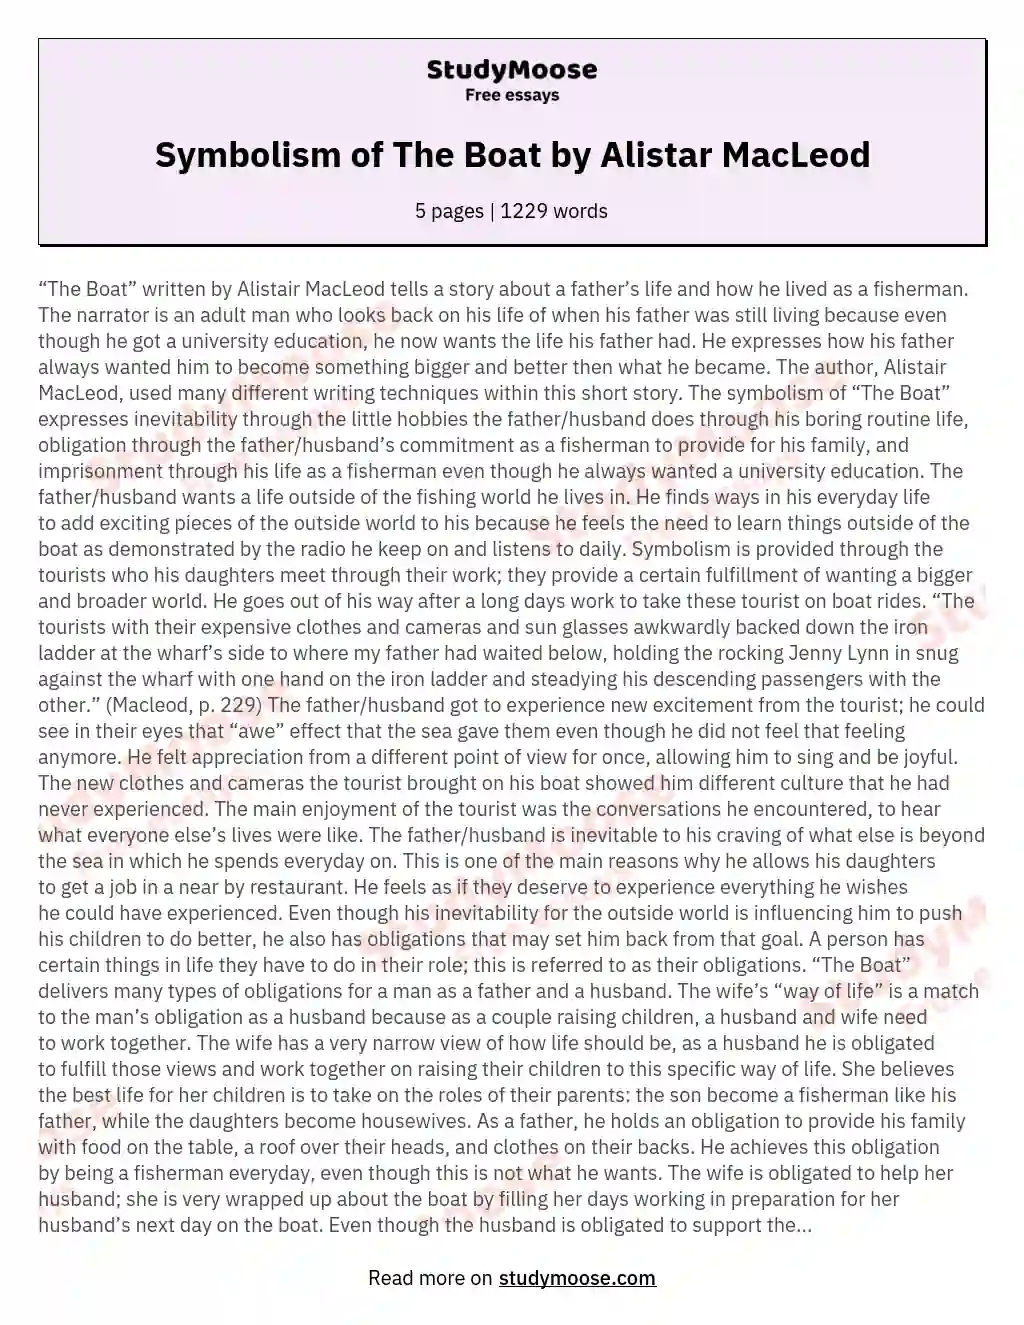 Symbolism of The Boat by Alistar MacLeod essay